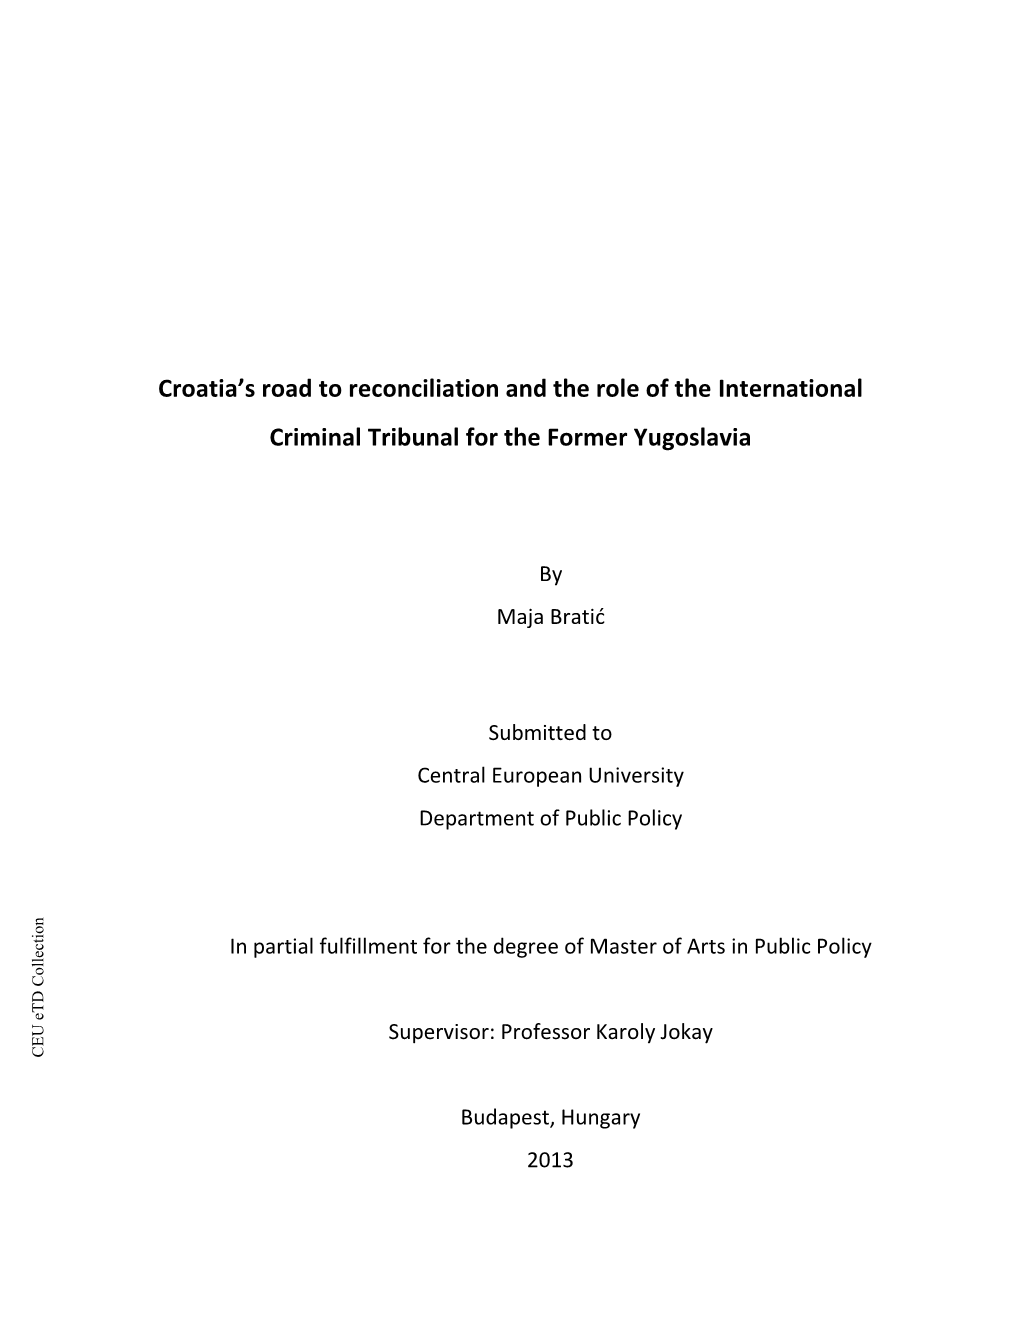 Croatia's Road to Reconciliation and the Role of the International Criminal